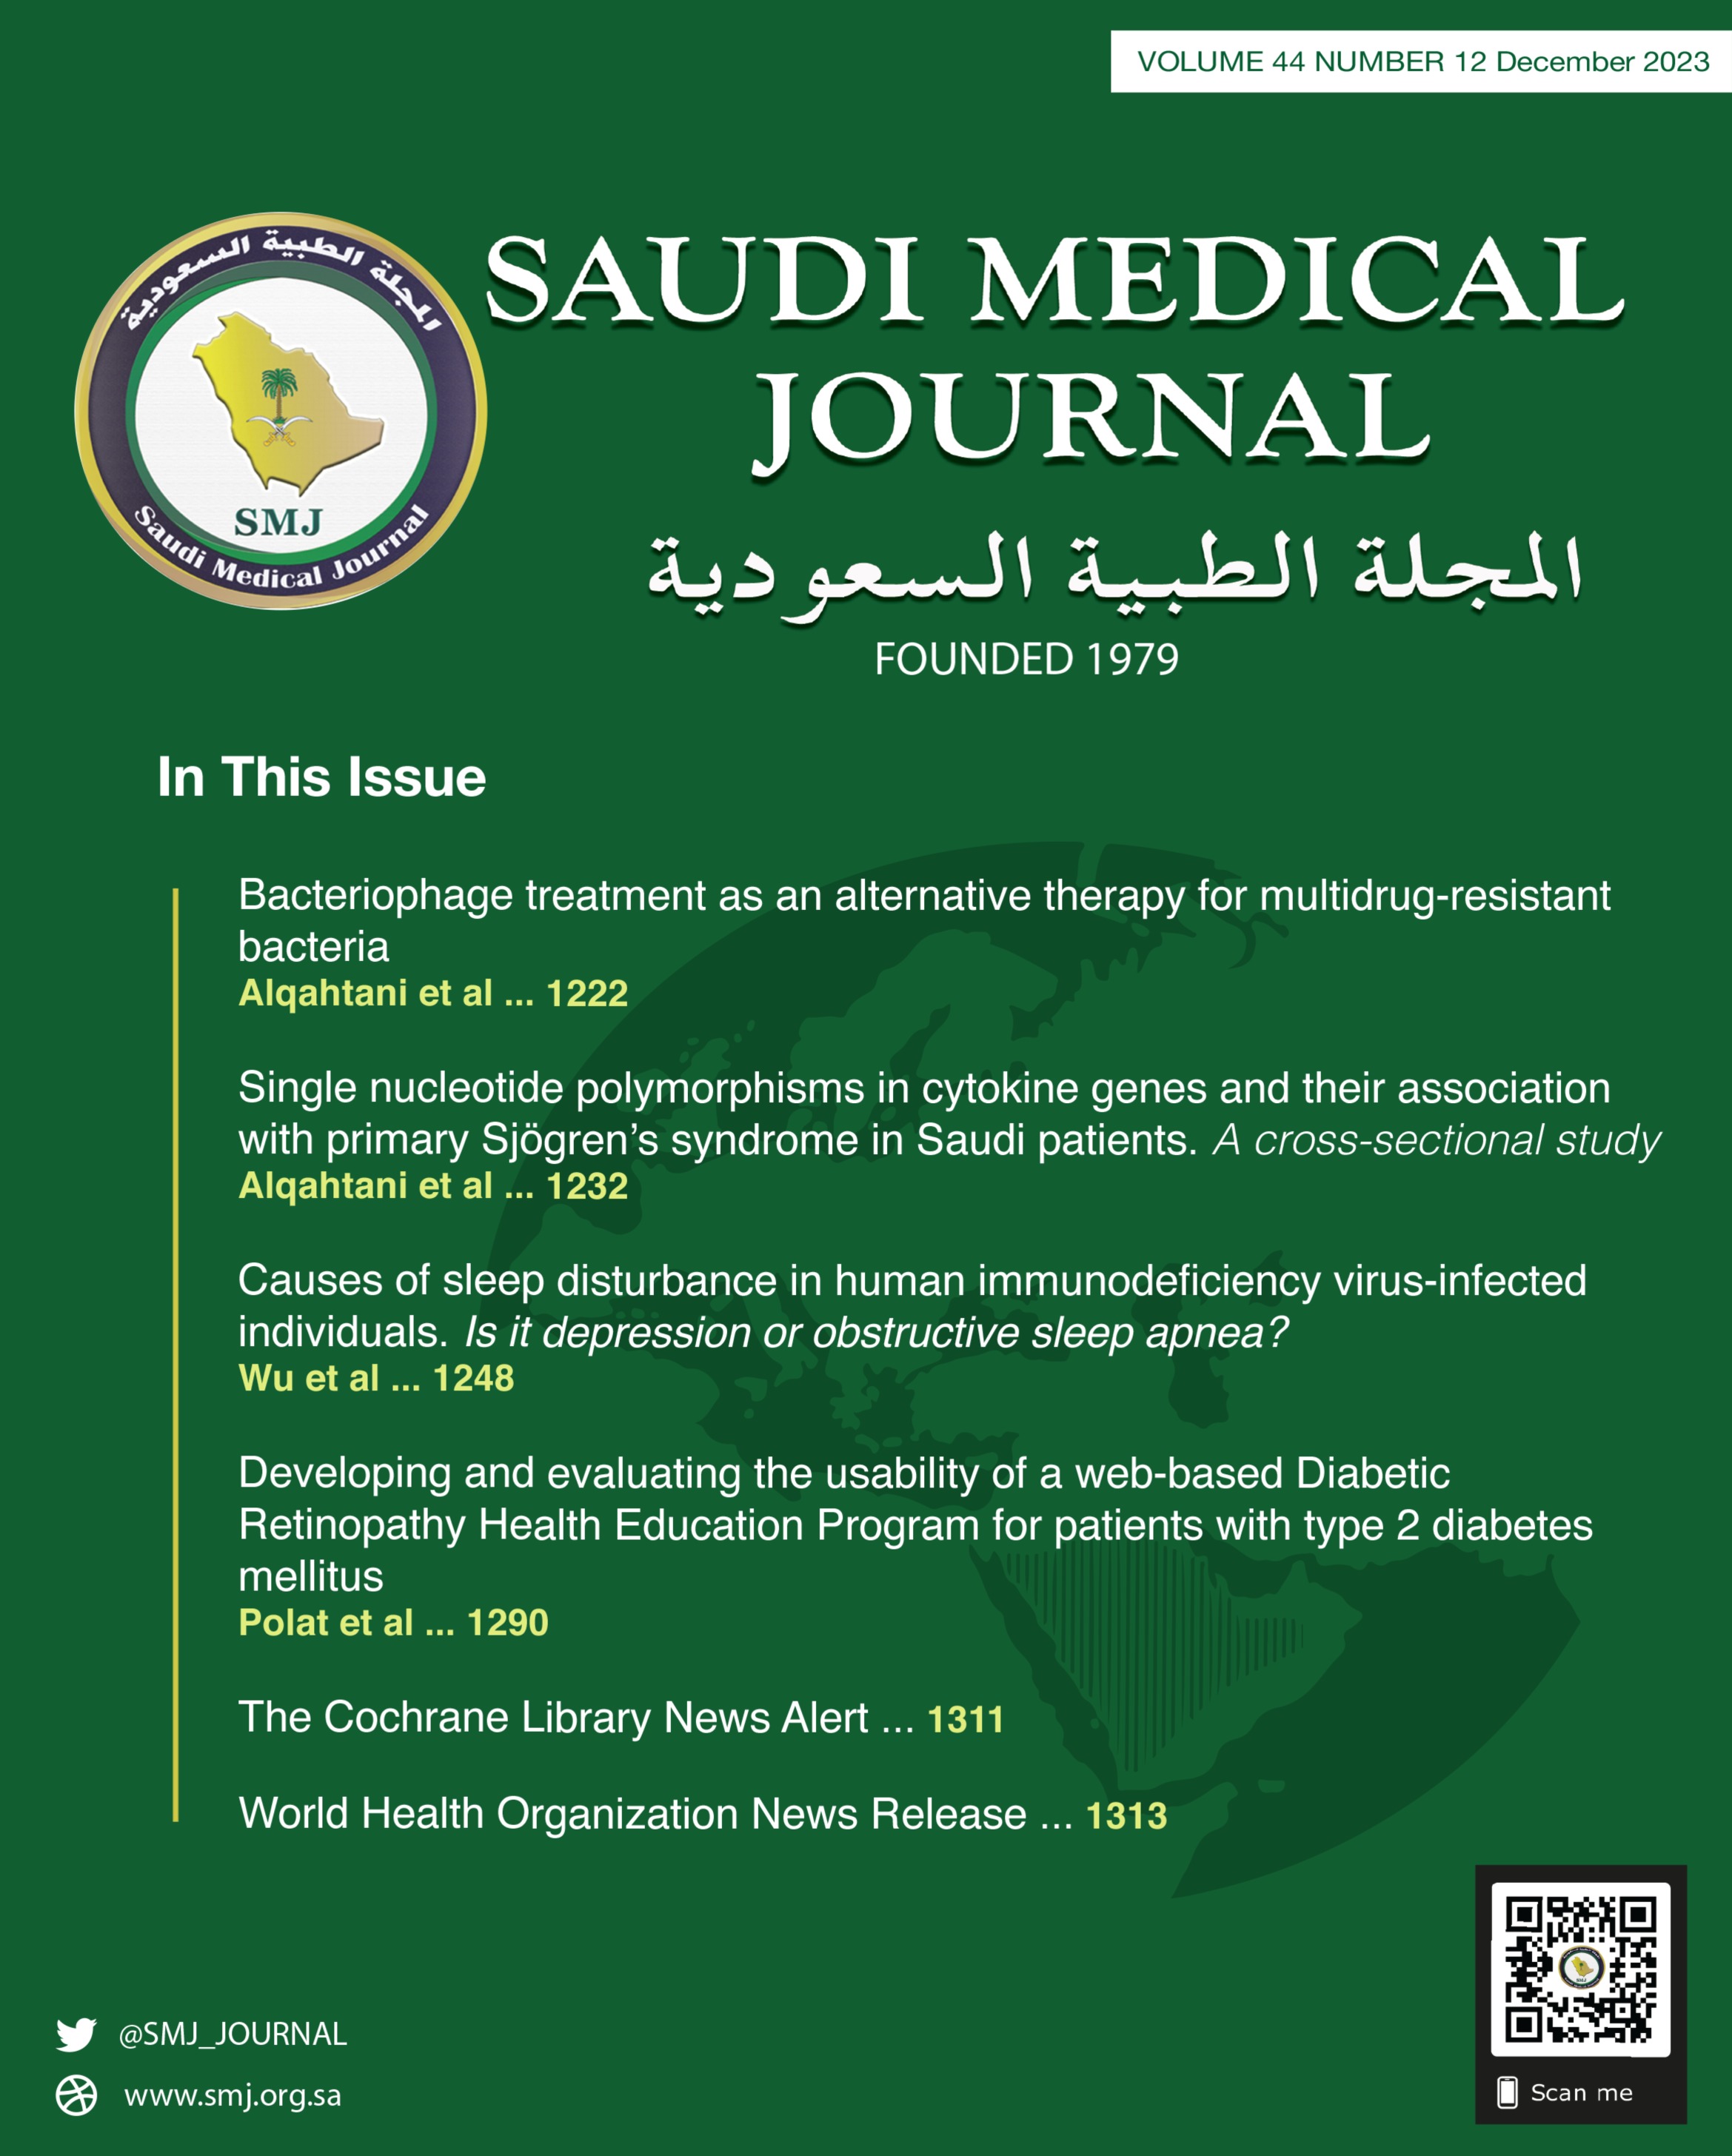 Single nucleotide polymorphisms in cytokine genes and their association with primary Sjögrens syndrome in Saudi patients: A cross-sectional study